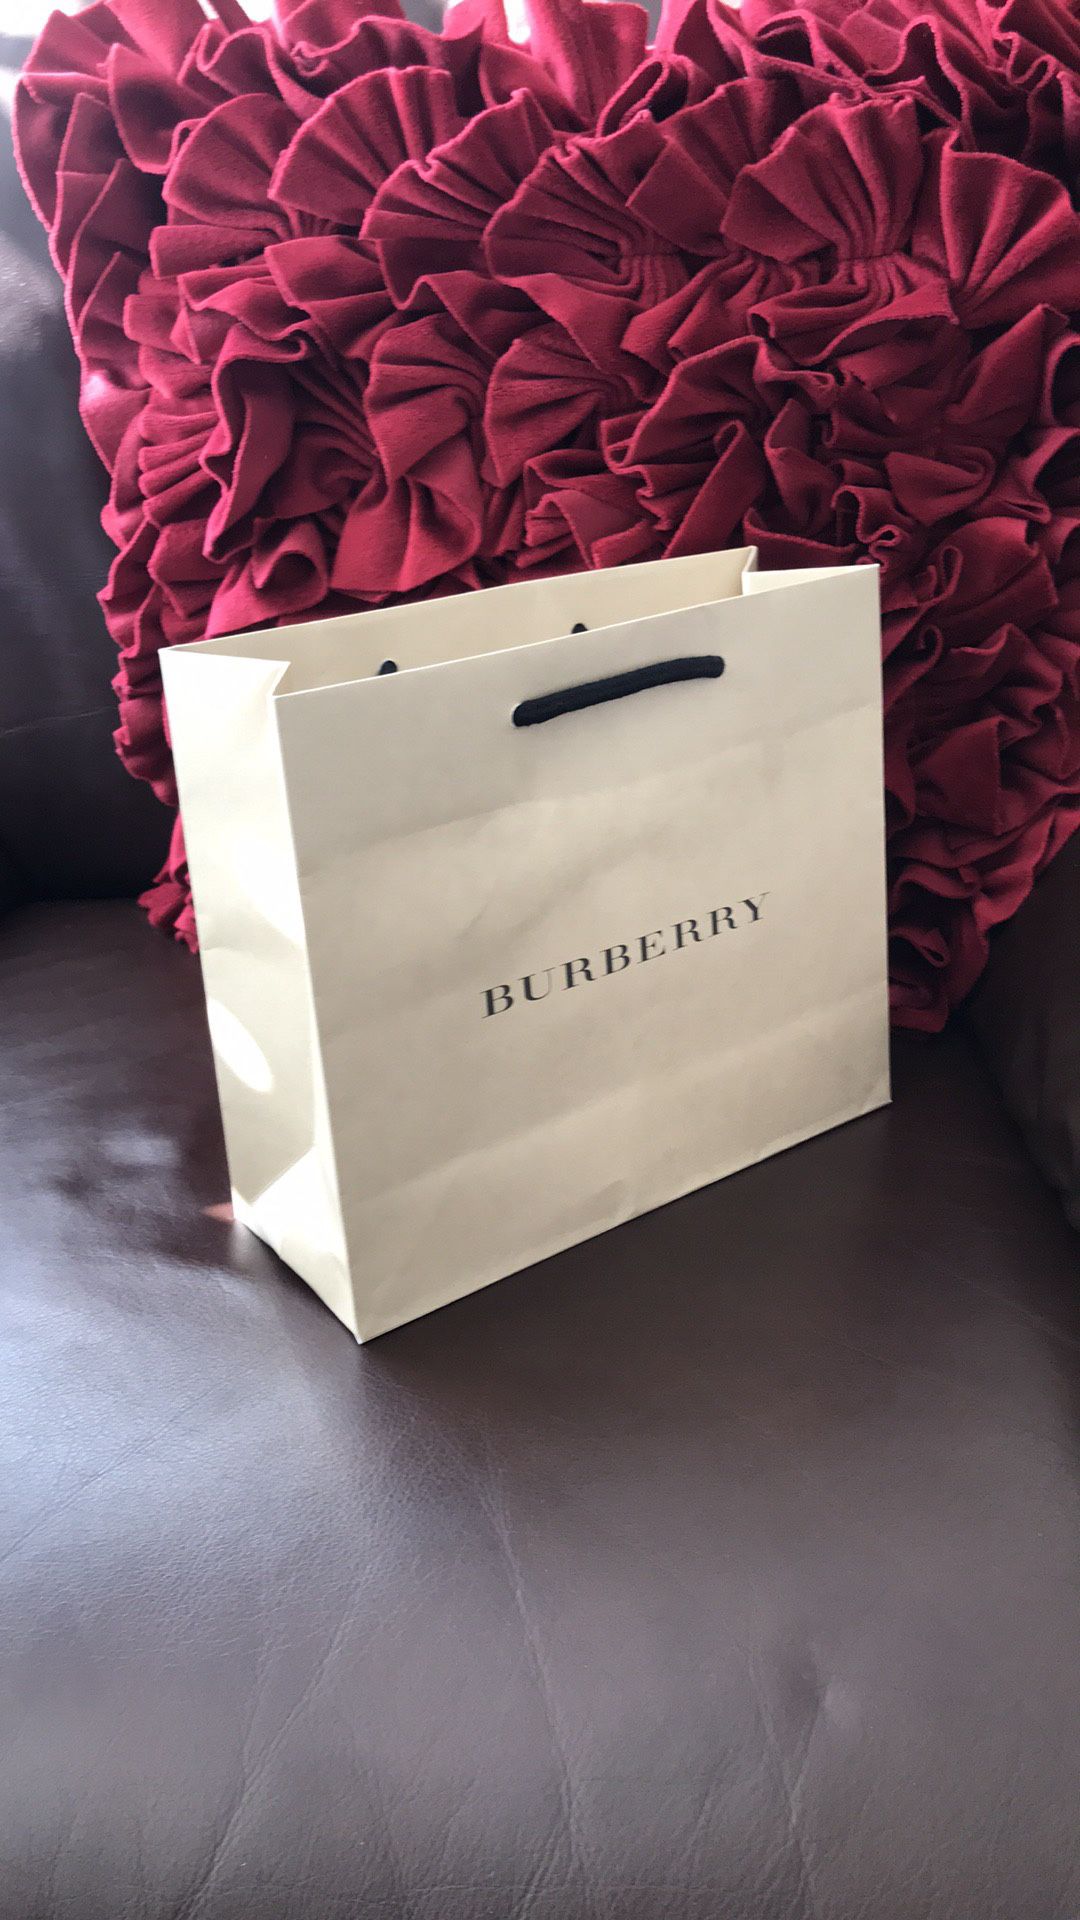 Burberry shopping bag new 8x9x3.5 inches